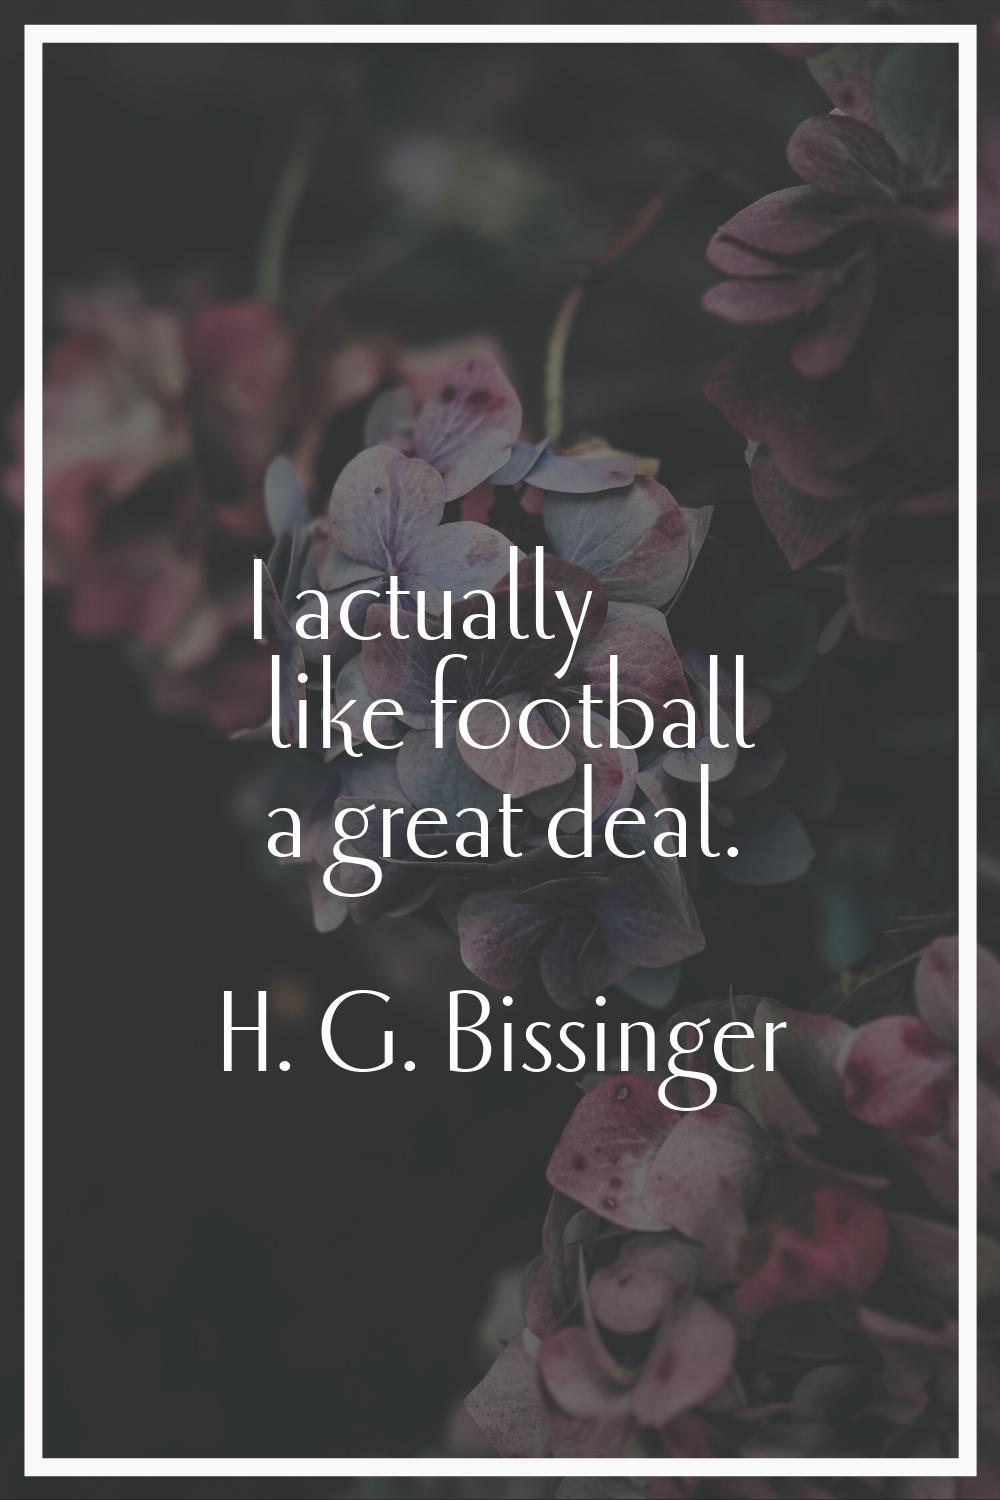 I actually like football a great deal.